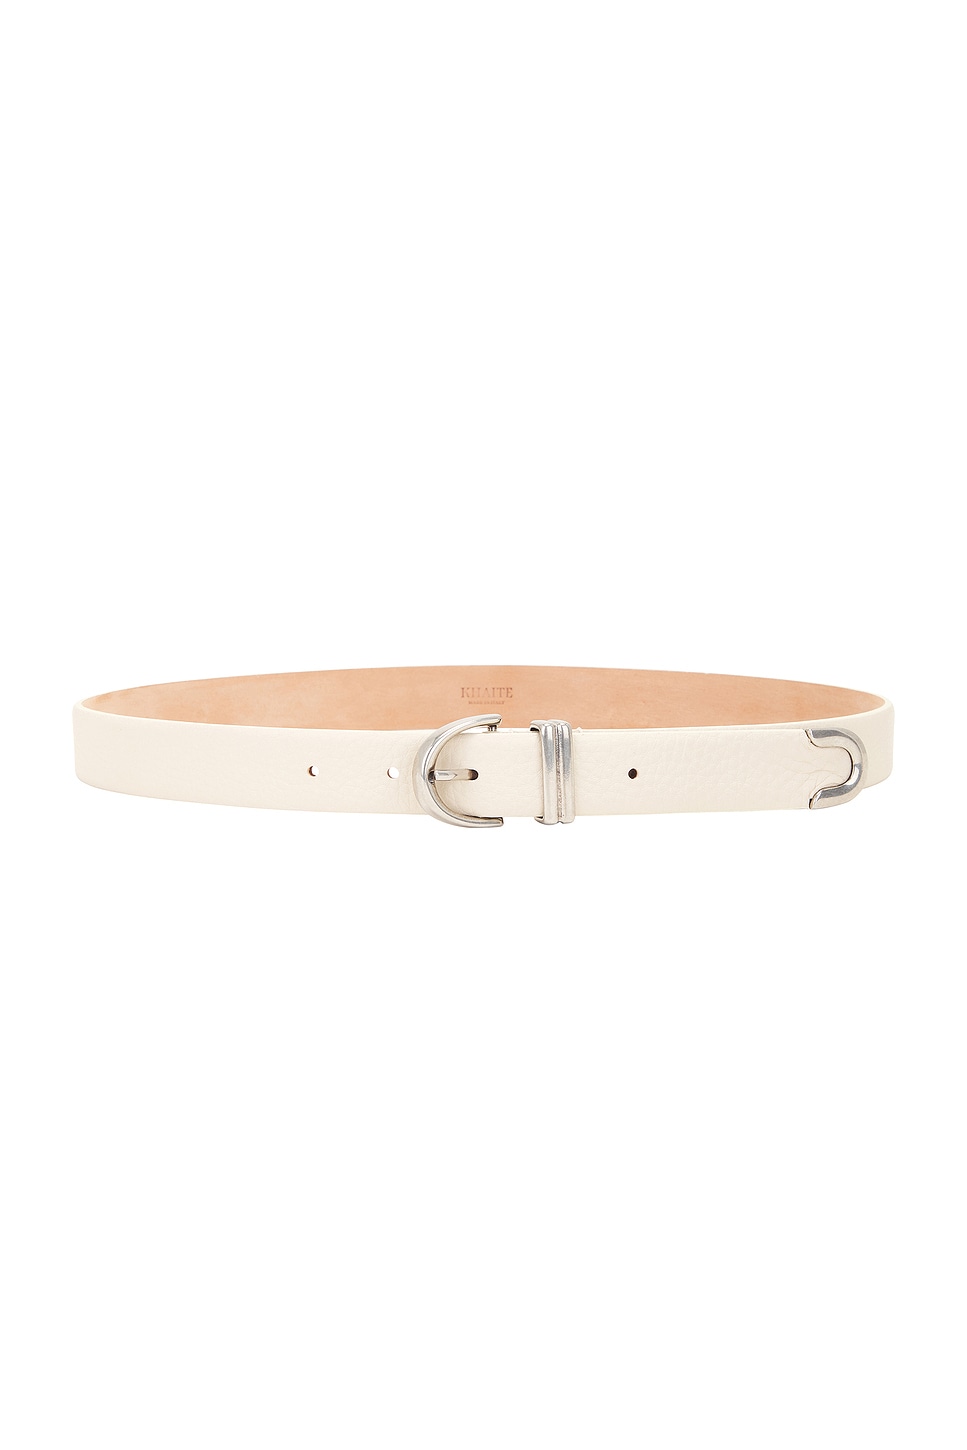 Bambi Antique Silver 25mm Belt in Ivory